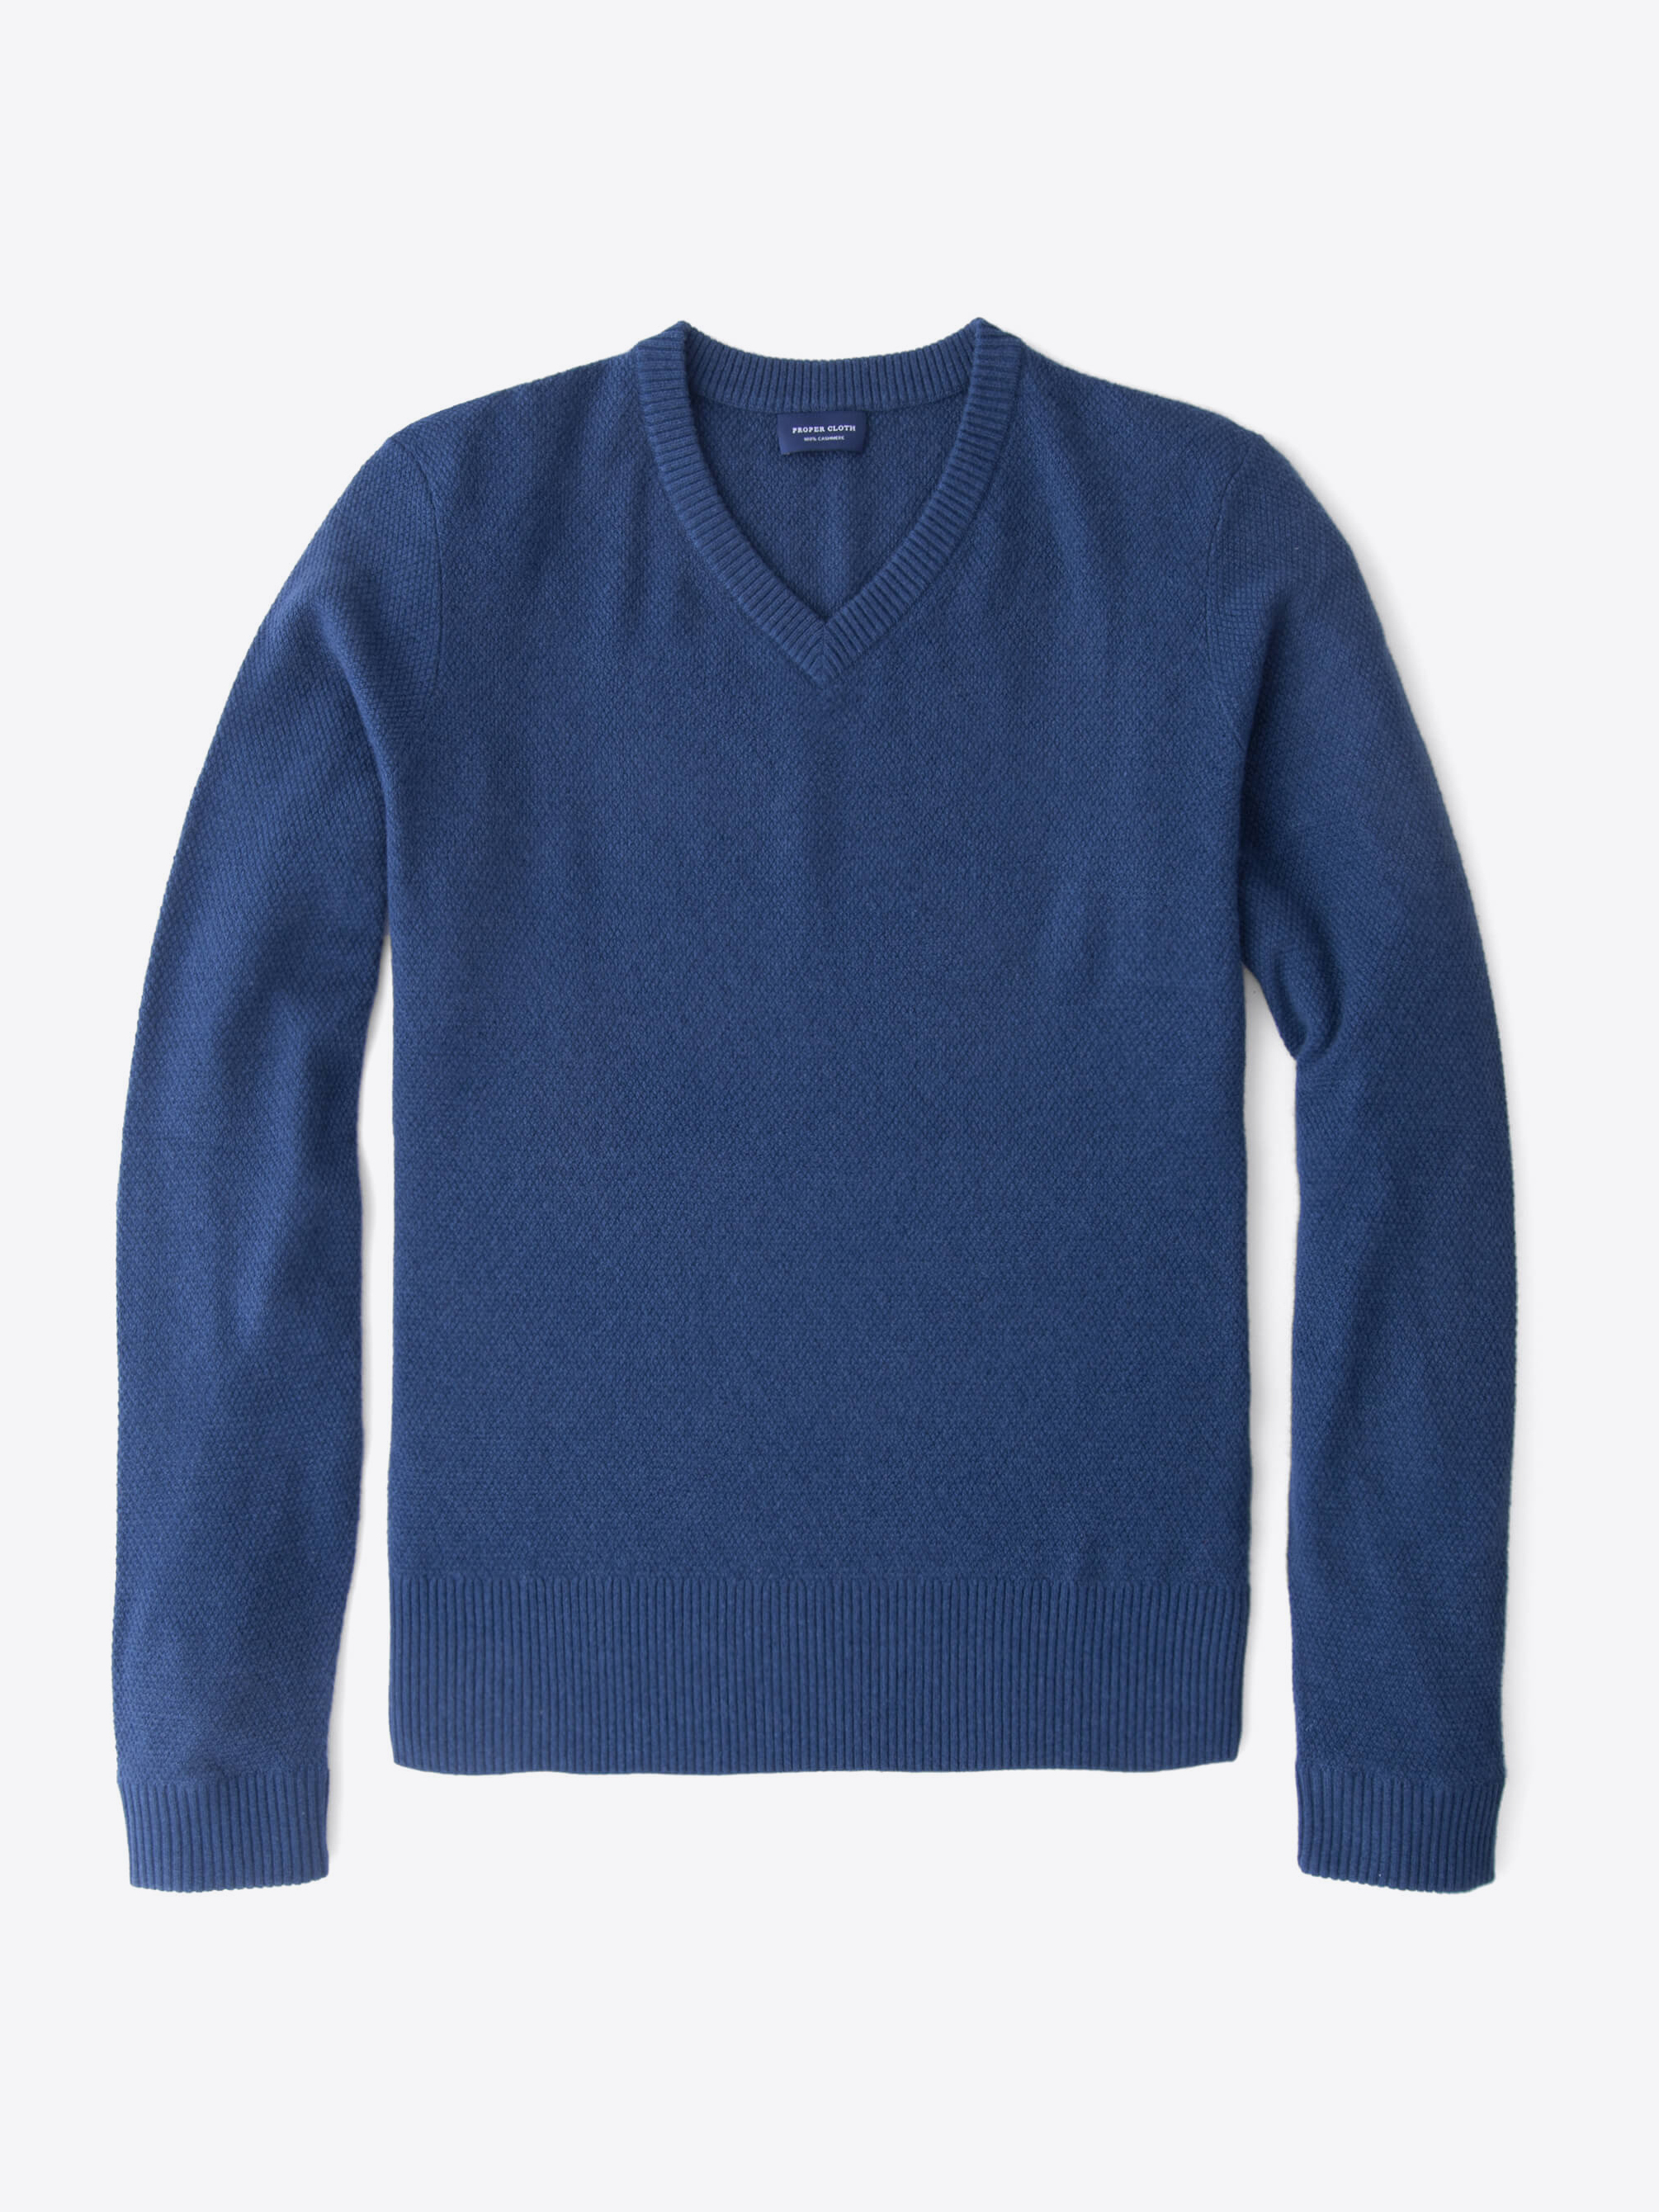 Zoom Image of Ocean Blue Cobble Stitch Cashmere V-Neck Sweater